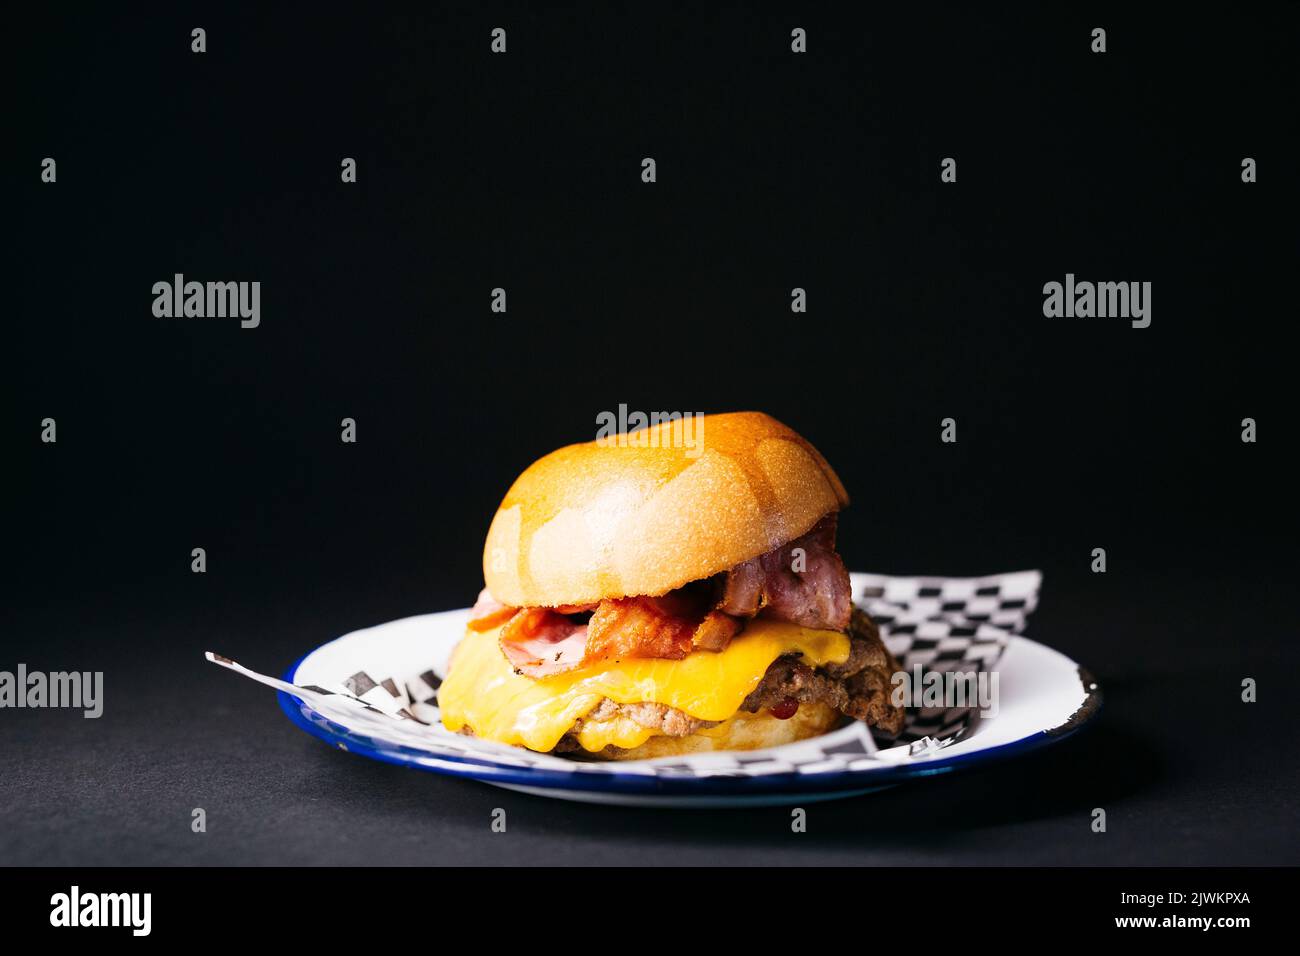 Doble cheeseburger with bacon, melted cheese and ketchup over a black background Stock Photo